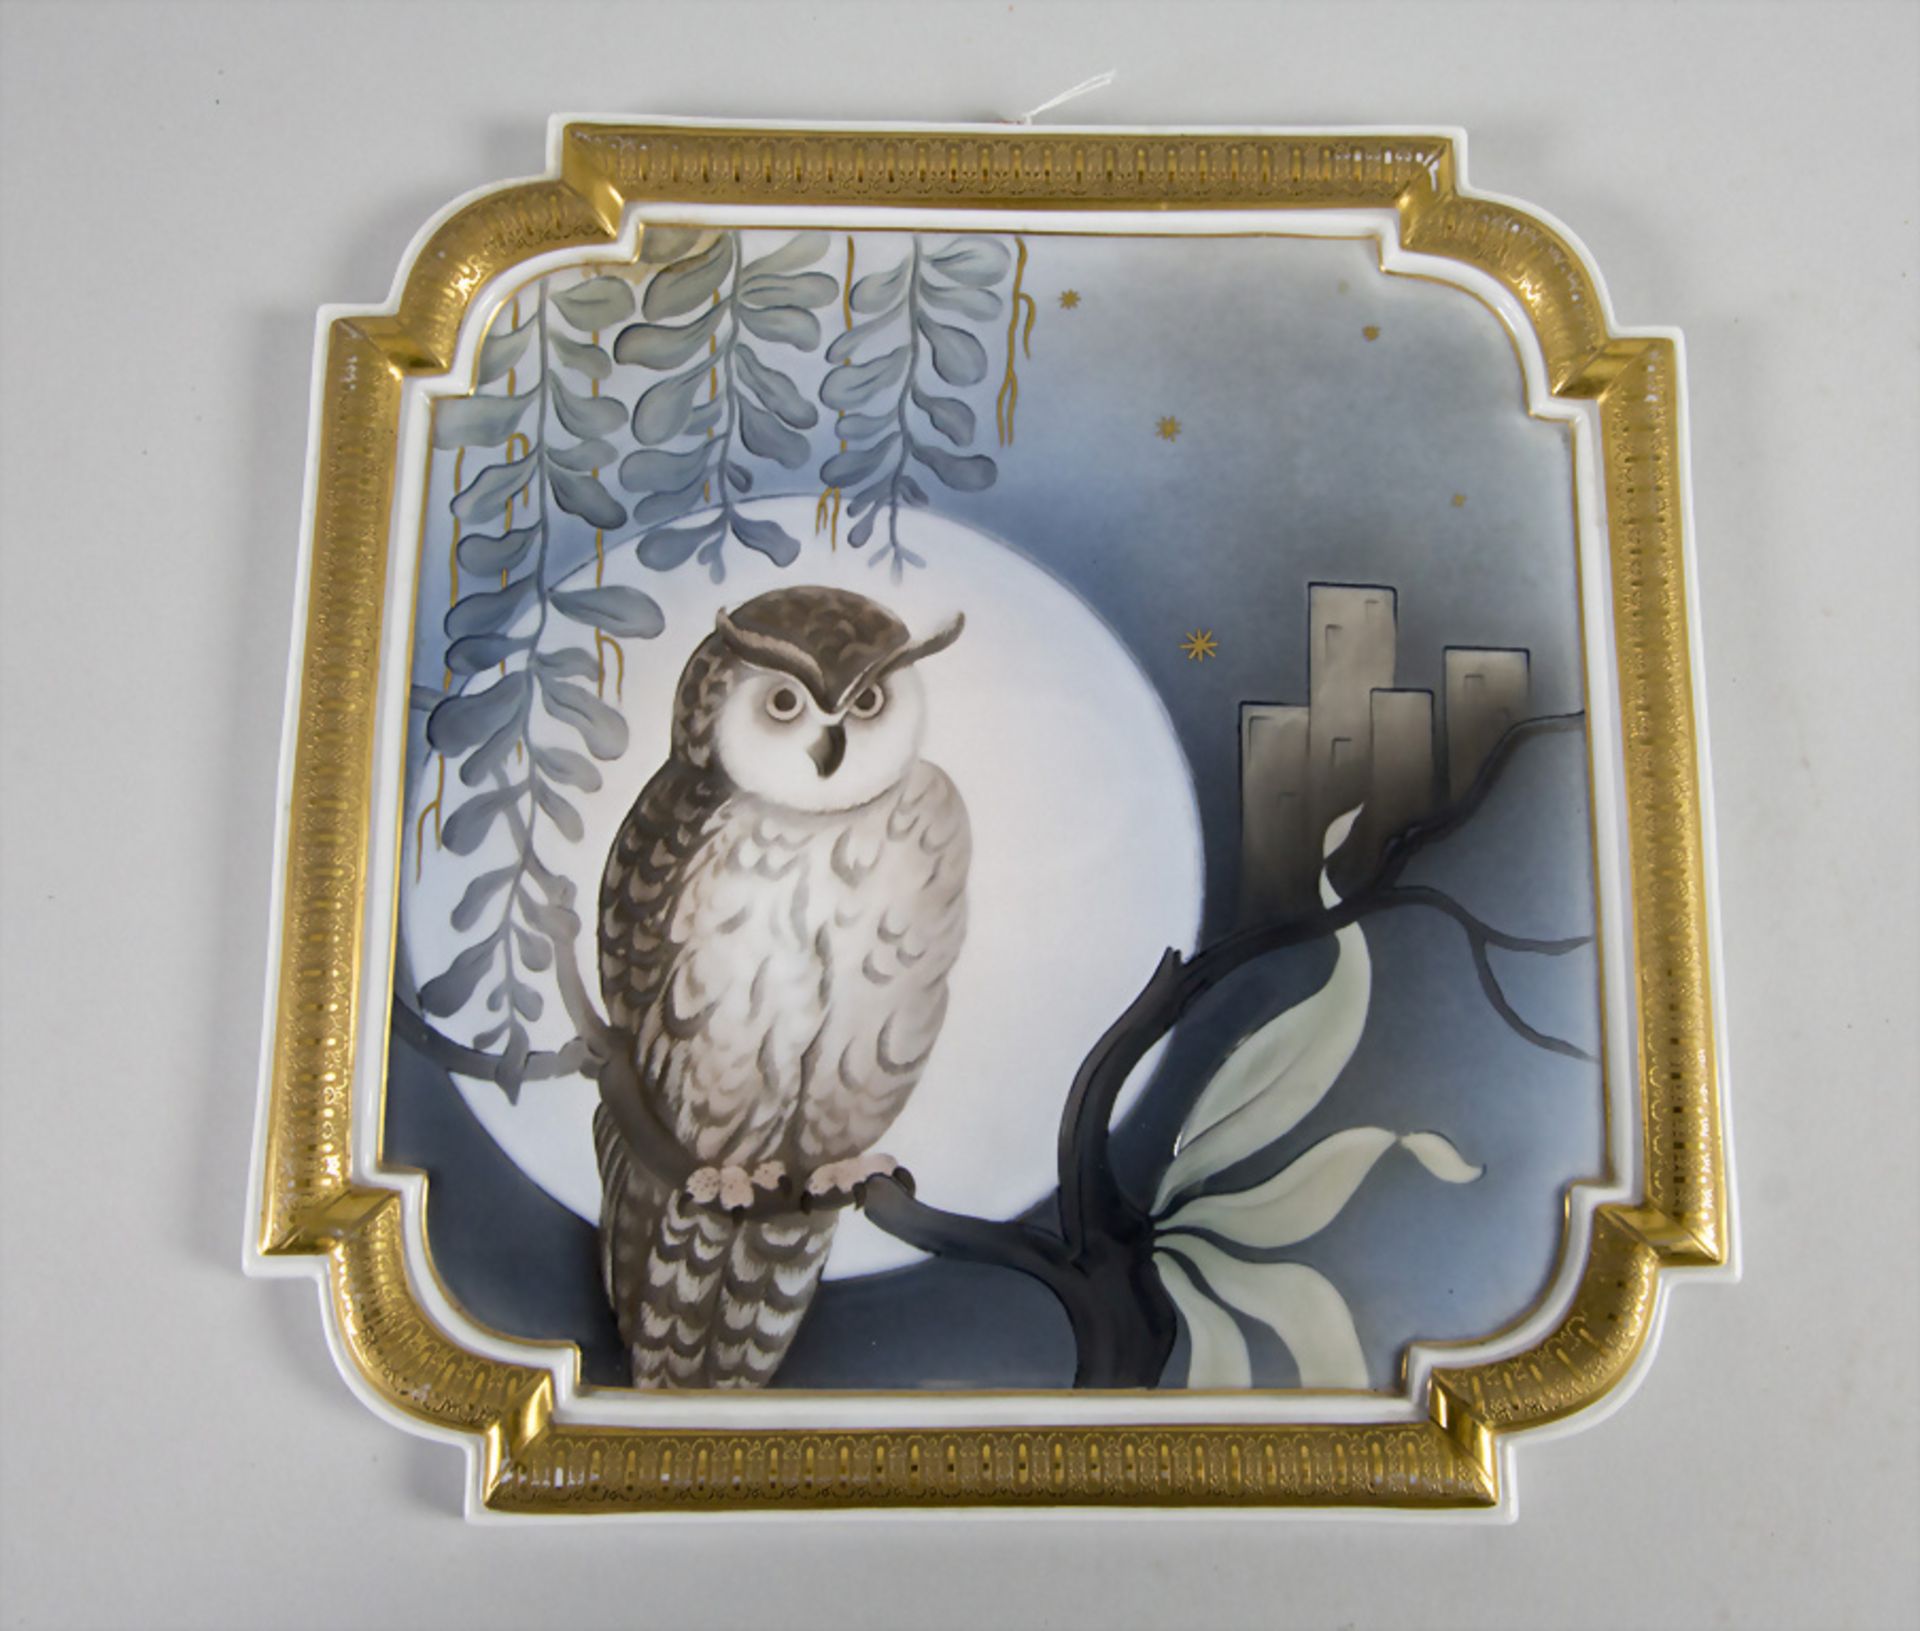 Jugendstil Wandrelief 'Eule mit Vollmond' / An Art Nouveau wall relief 'Owl with full moon', ...